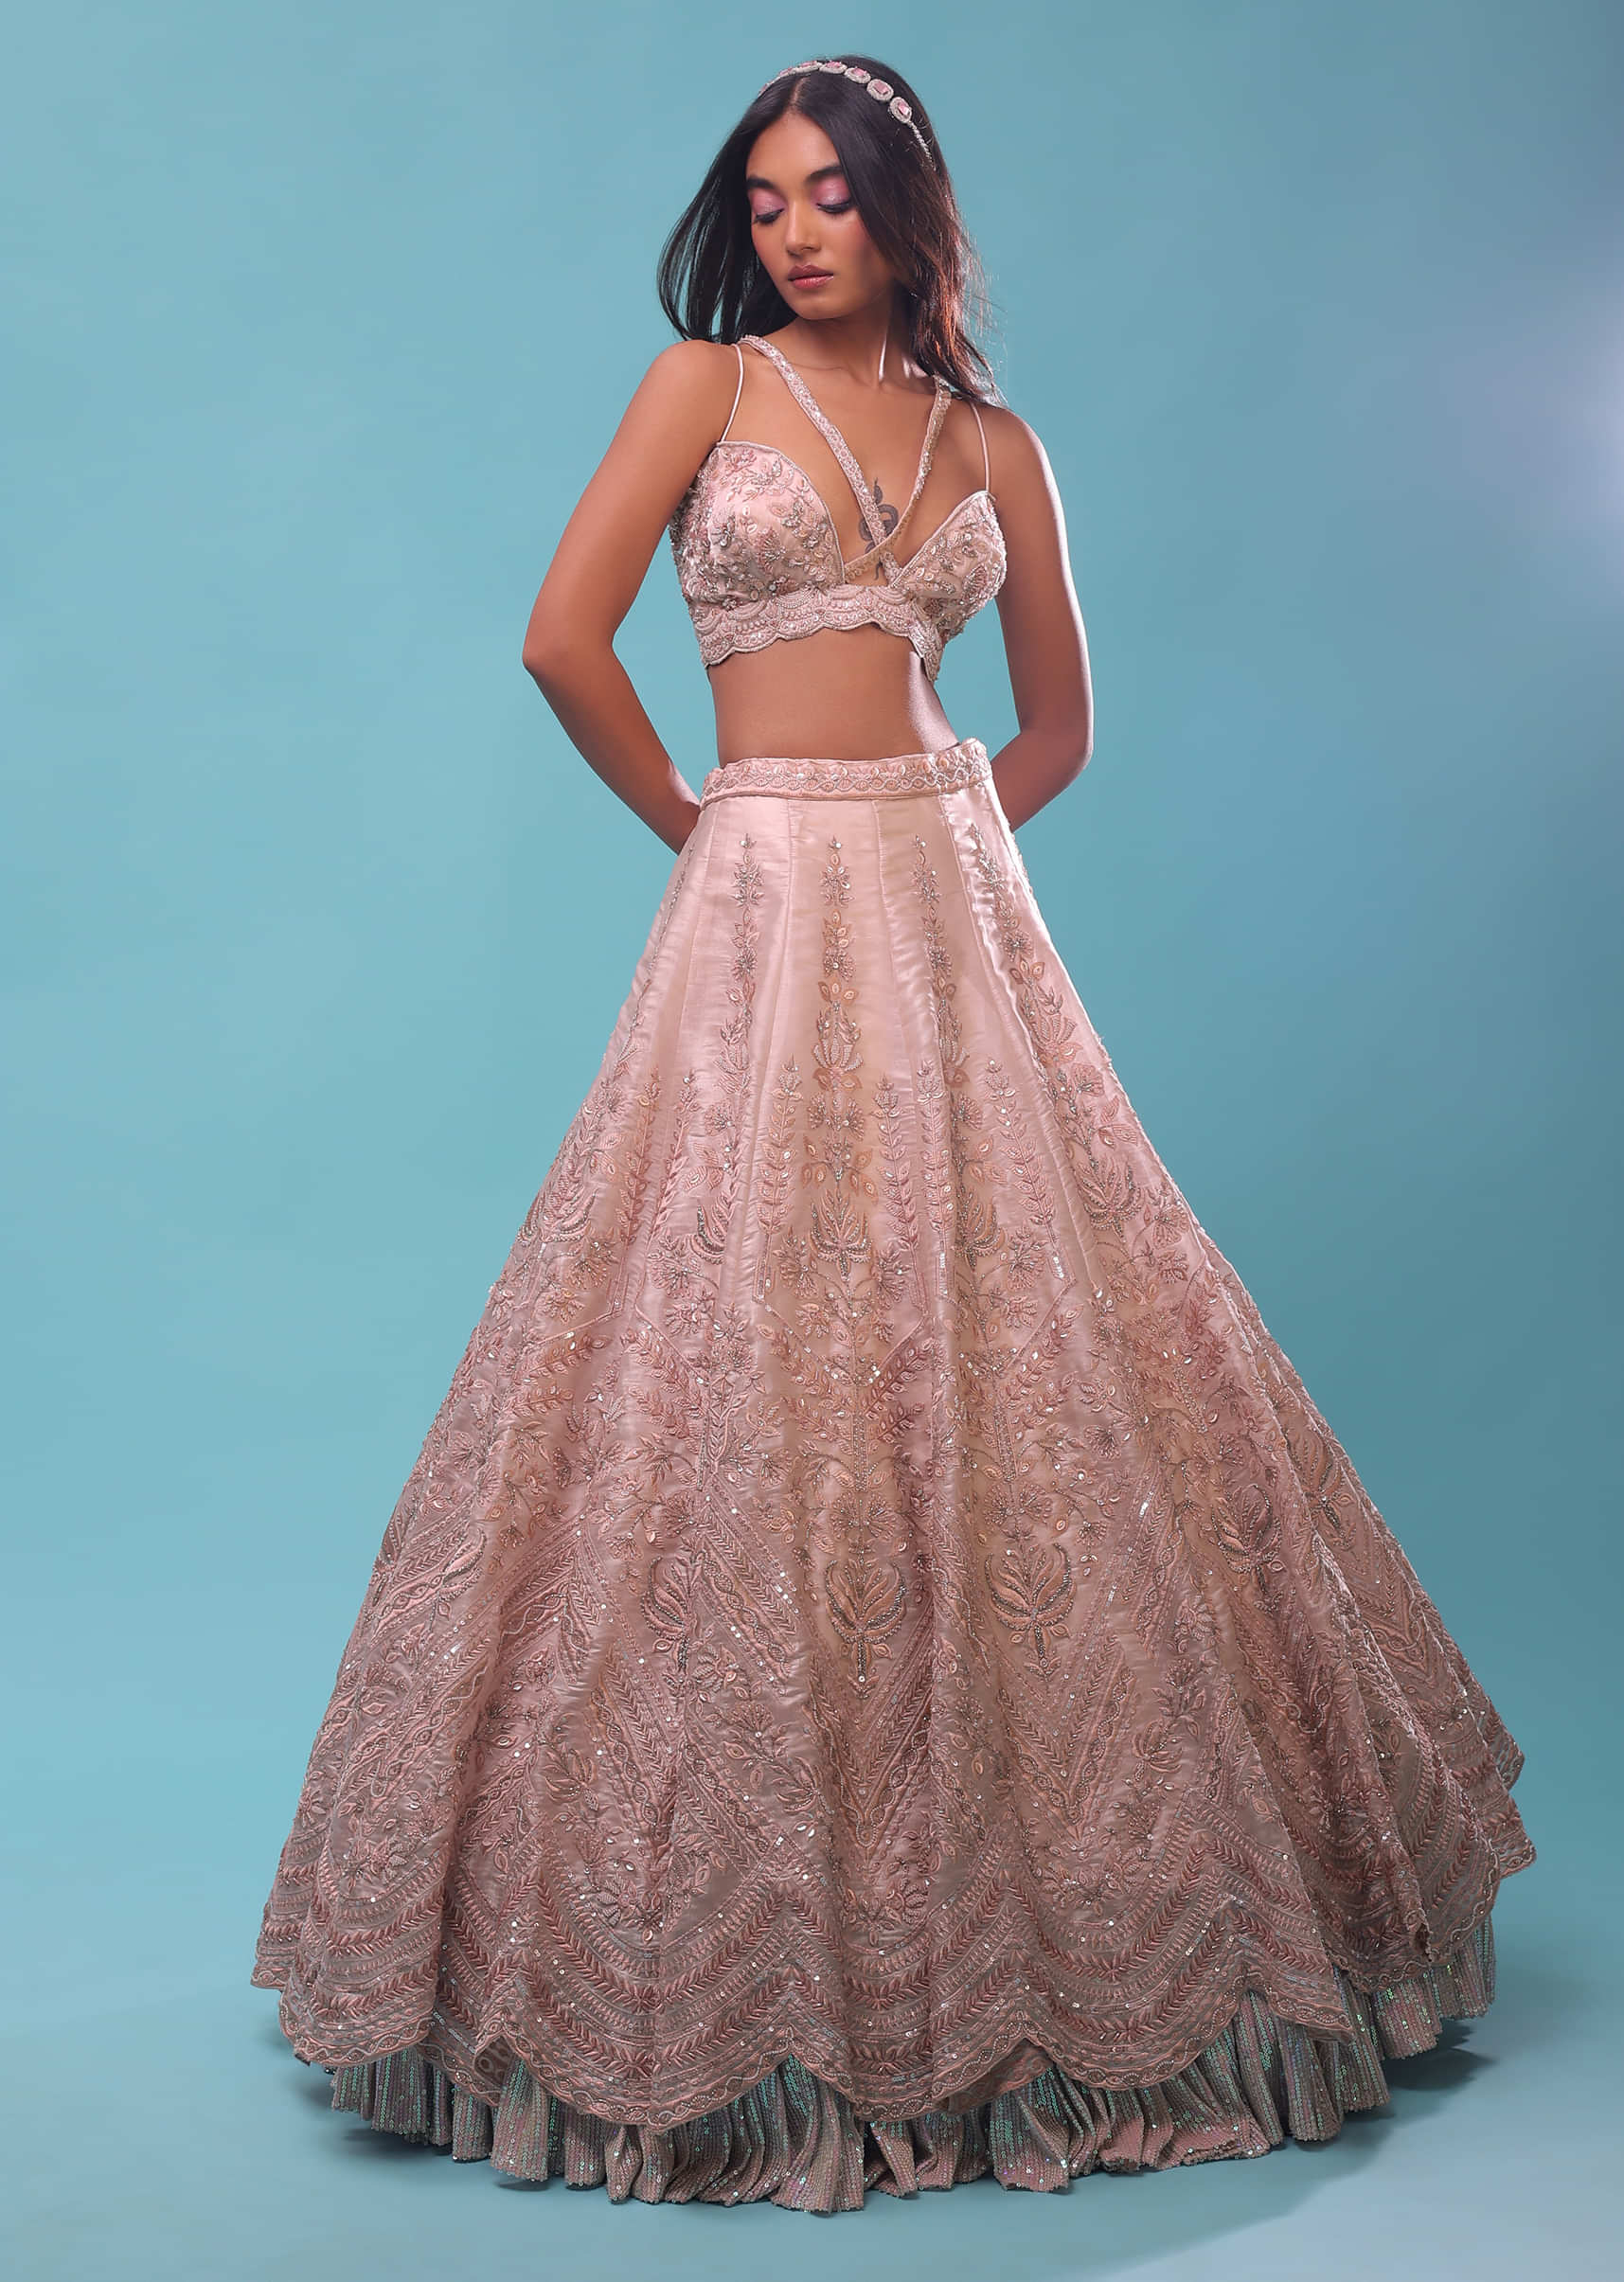 Powder Pink Lehenga And A Crop Top In Floral Resham Embroidery, Crop Top Comes In Spagetti Strap And Corset Neckline 